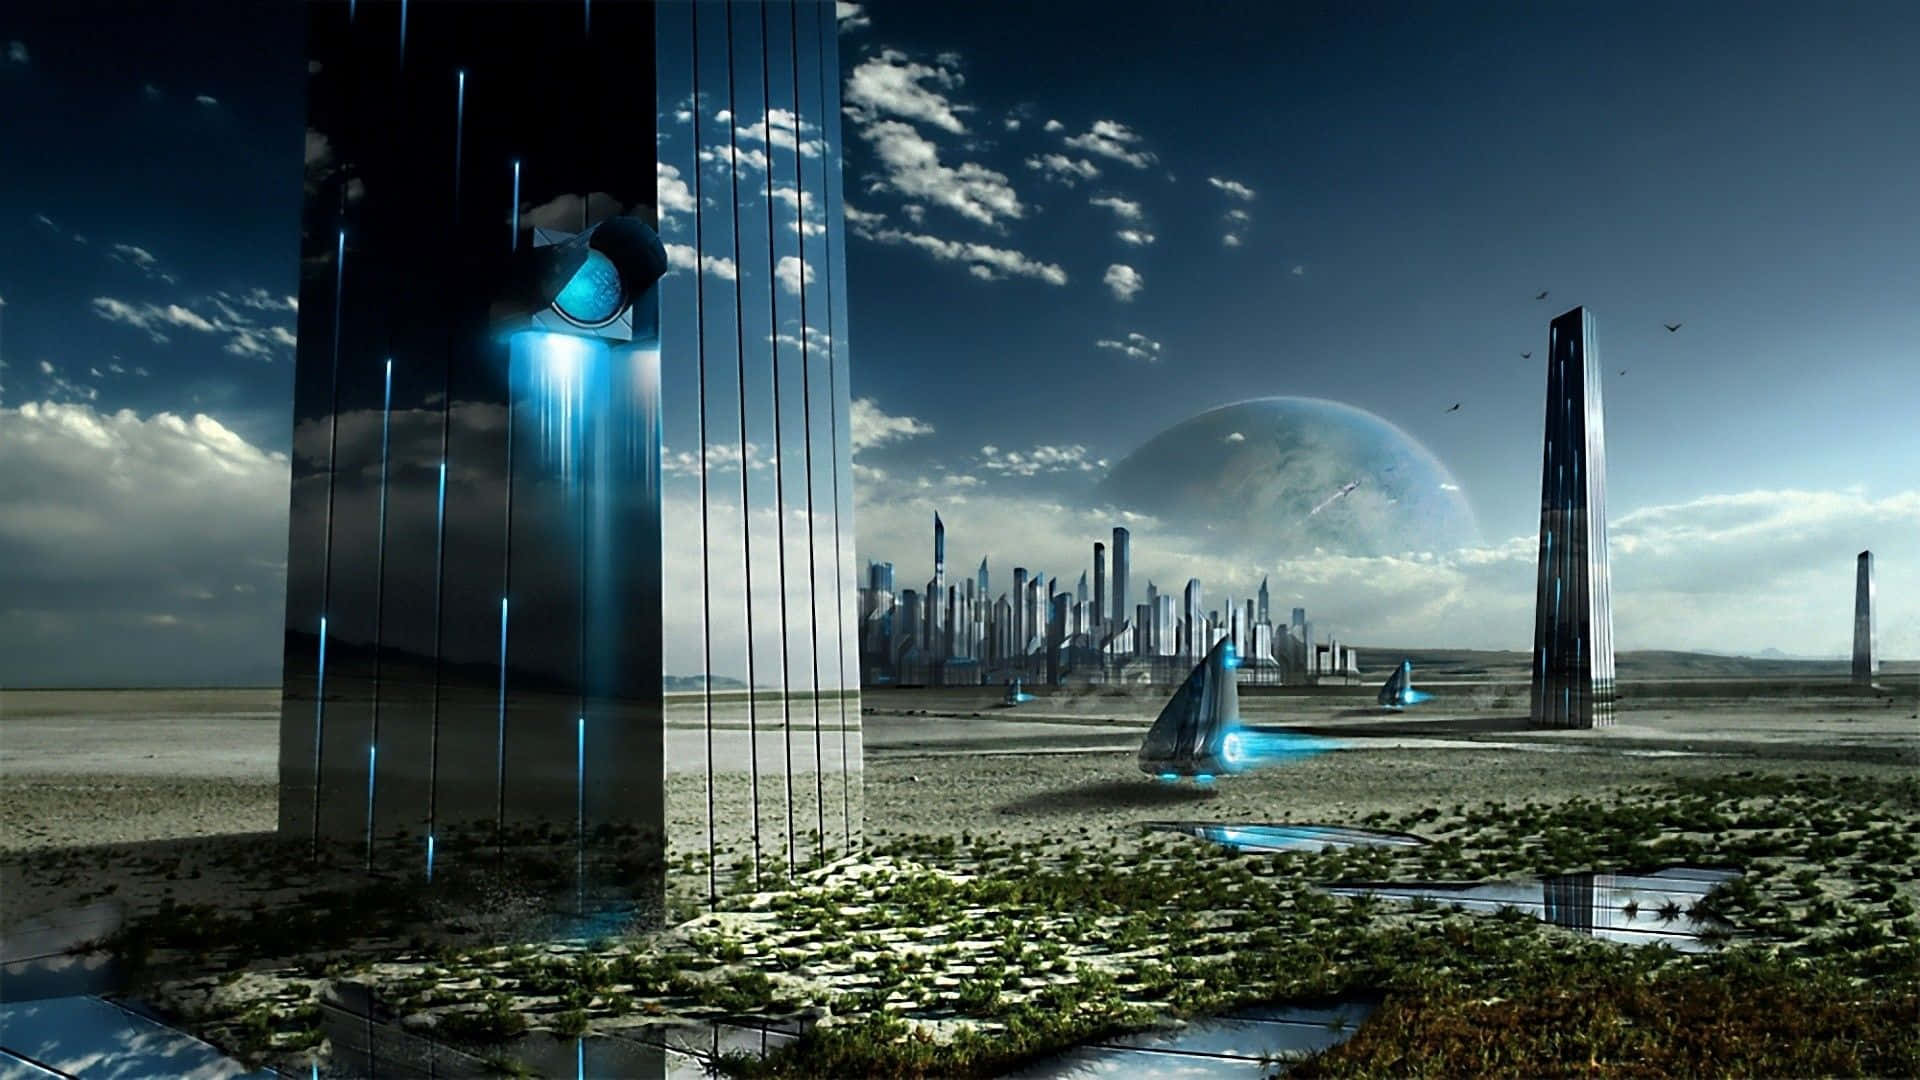 Sci Fi City Background Images, HD Pictures and Wallpaper For Free Download